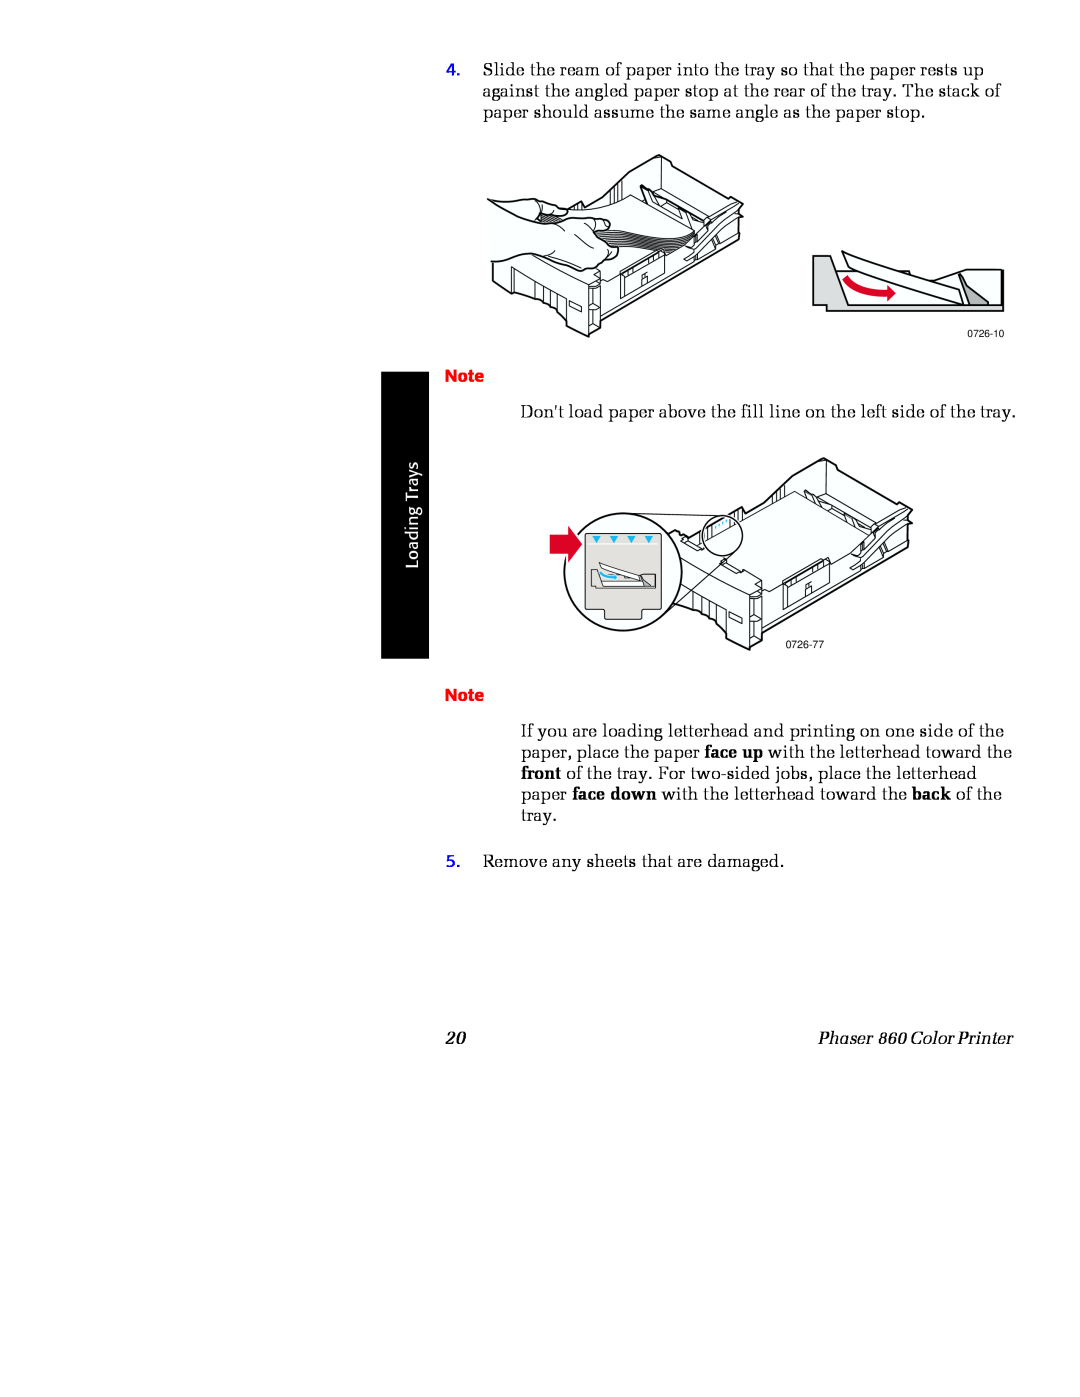 Xerox manual Dont load paper above the fill line on the left side of the tray, Loading Trays, Phaser 860 Color Printer 